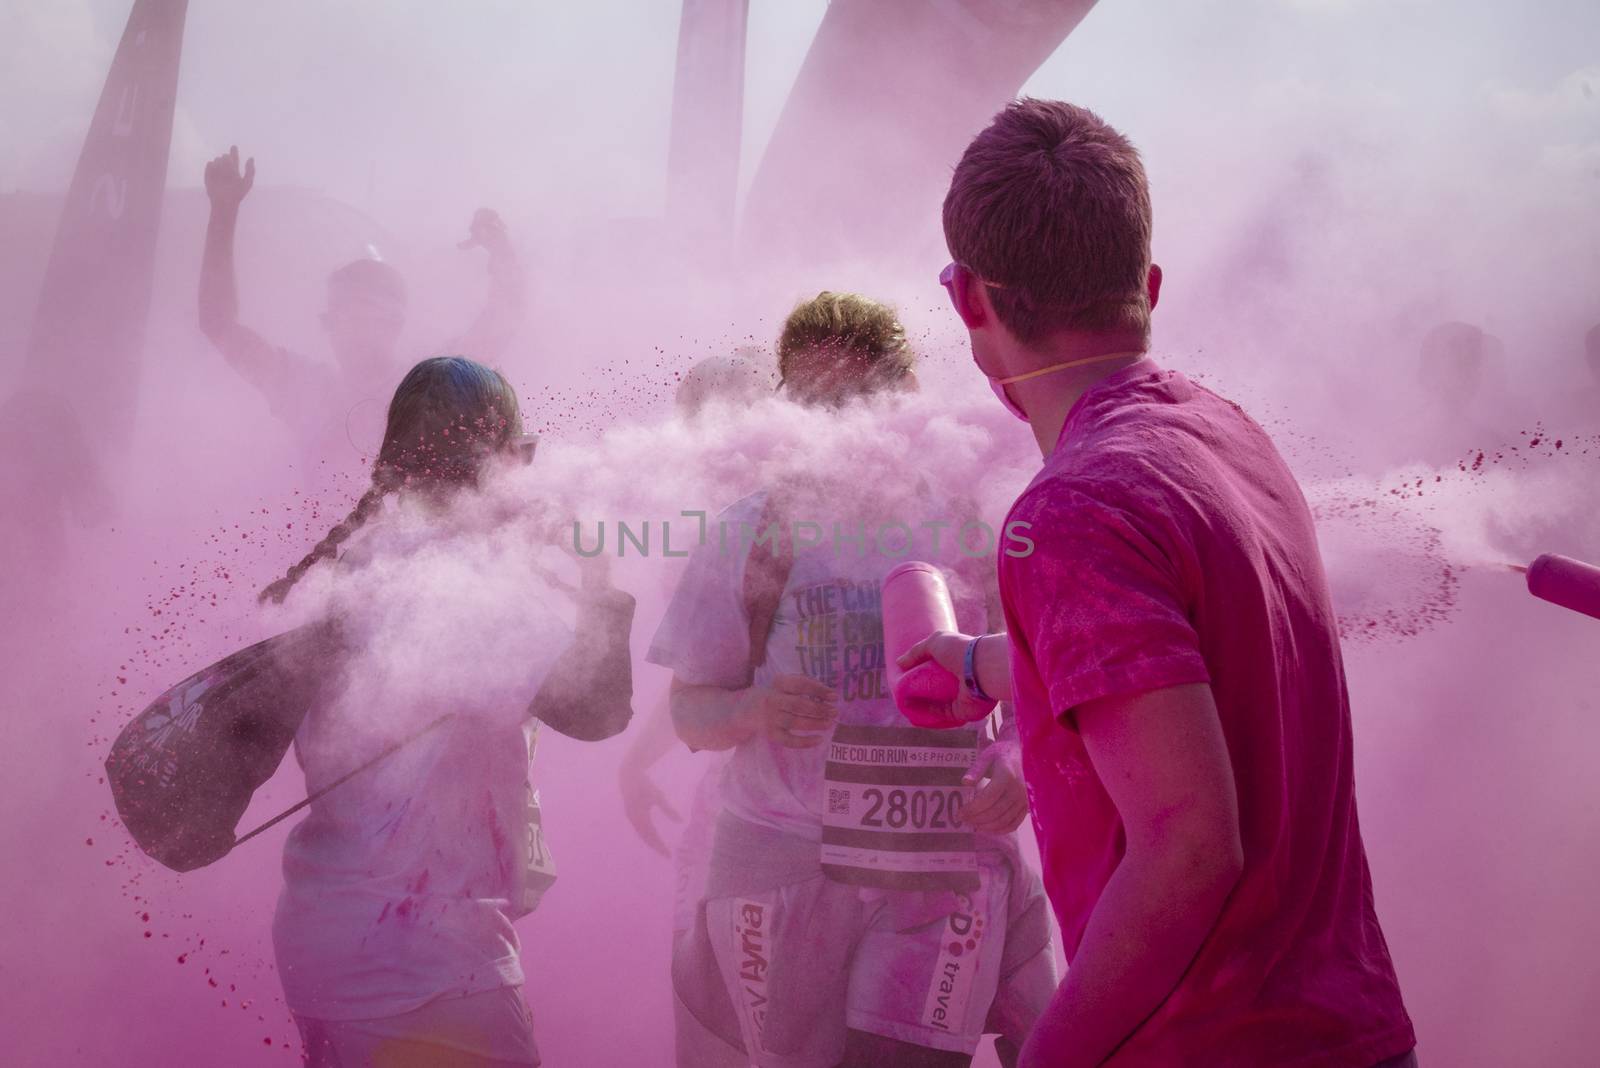 France: A volunteer throws colored pigments at participants of the Color Run by Sephora in Paris on April 17, 2016.